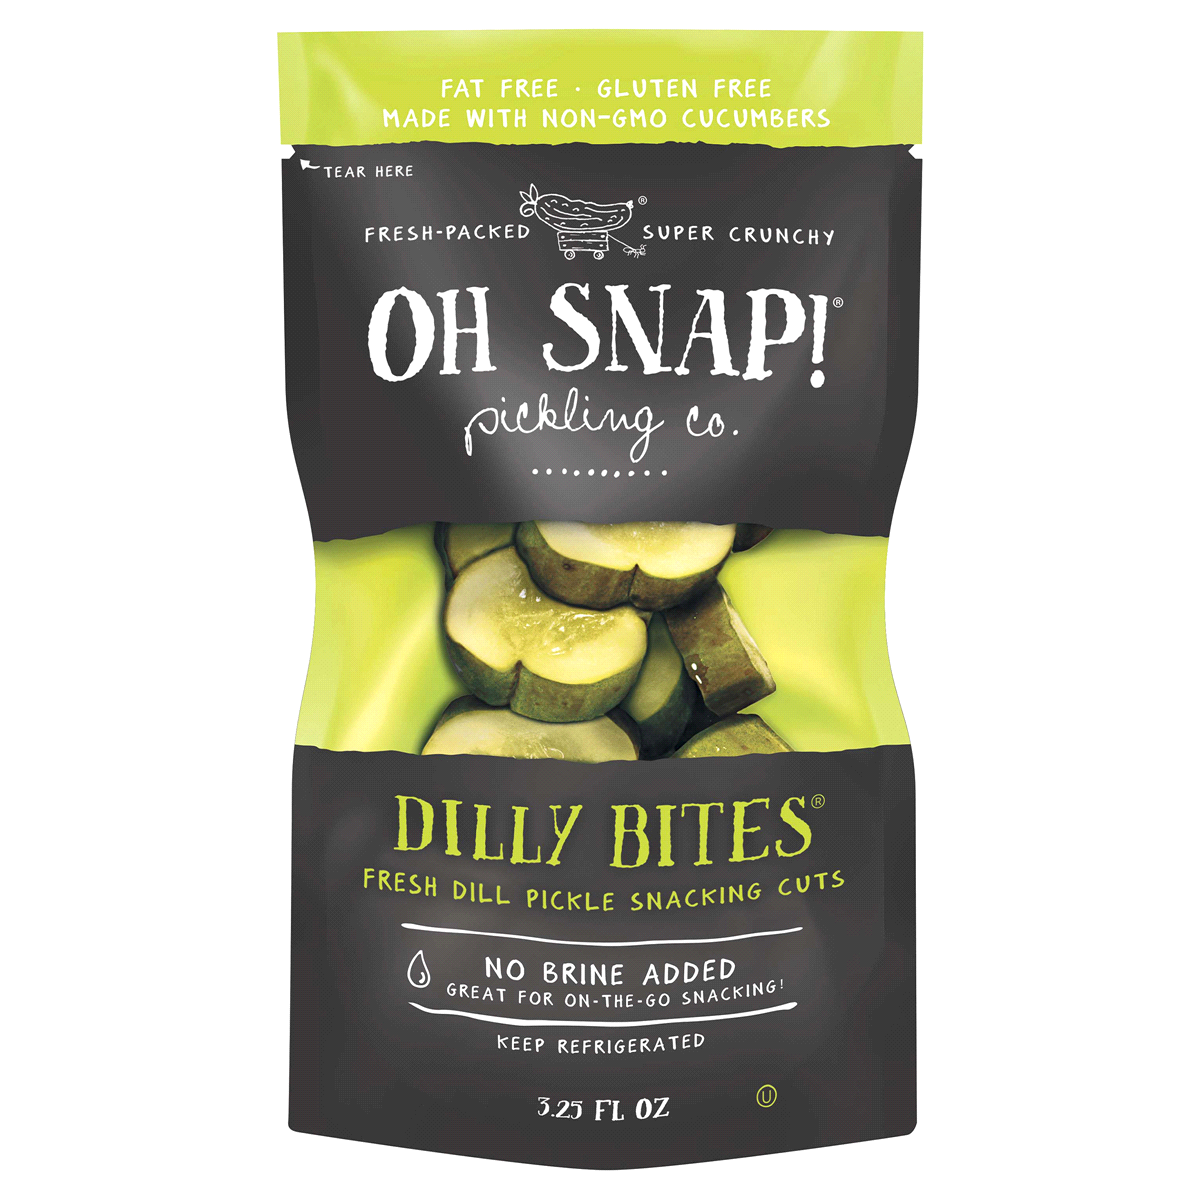 slide 1 of 1, Oh Snap! Pickling Co. Dilly Bites Fresh Dill Pickle Snacking Cuts, 3.5 oz